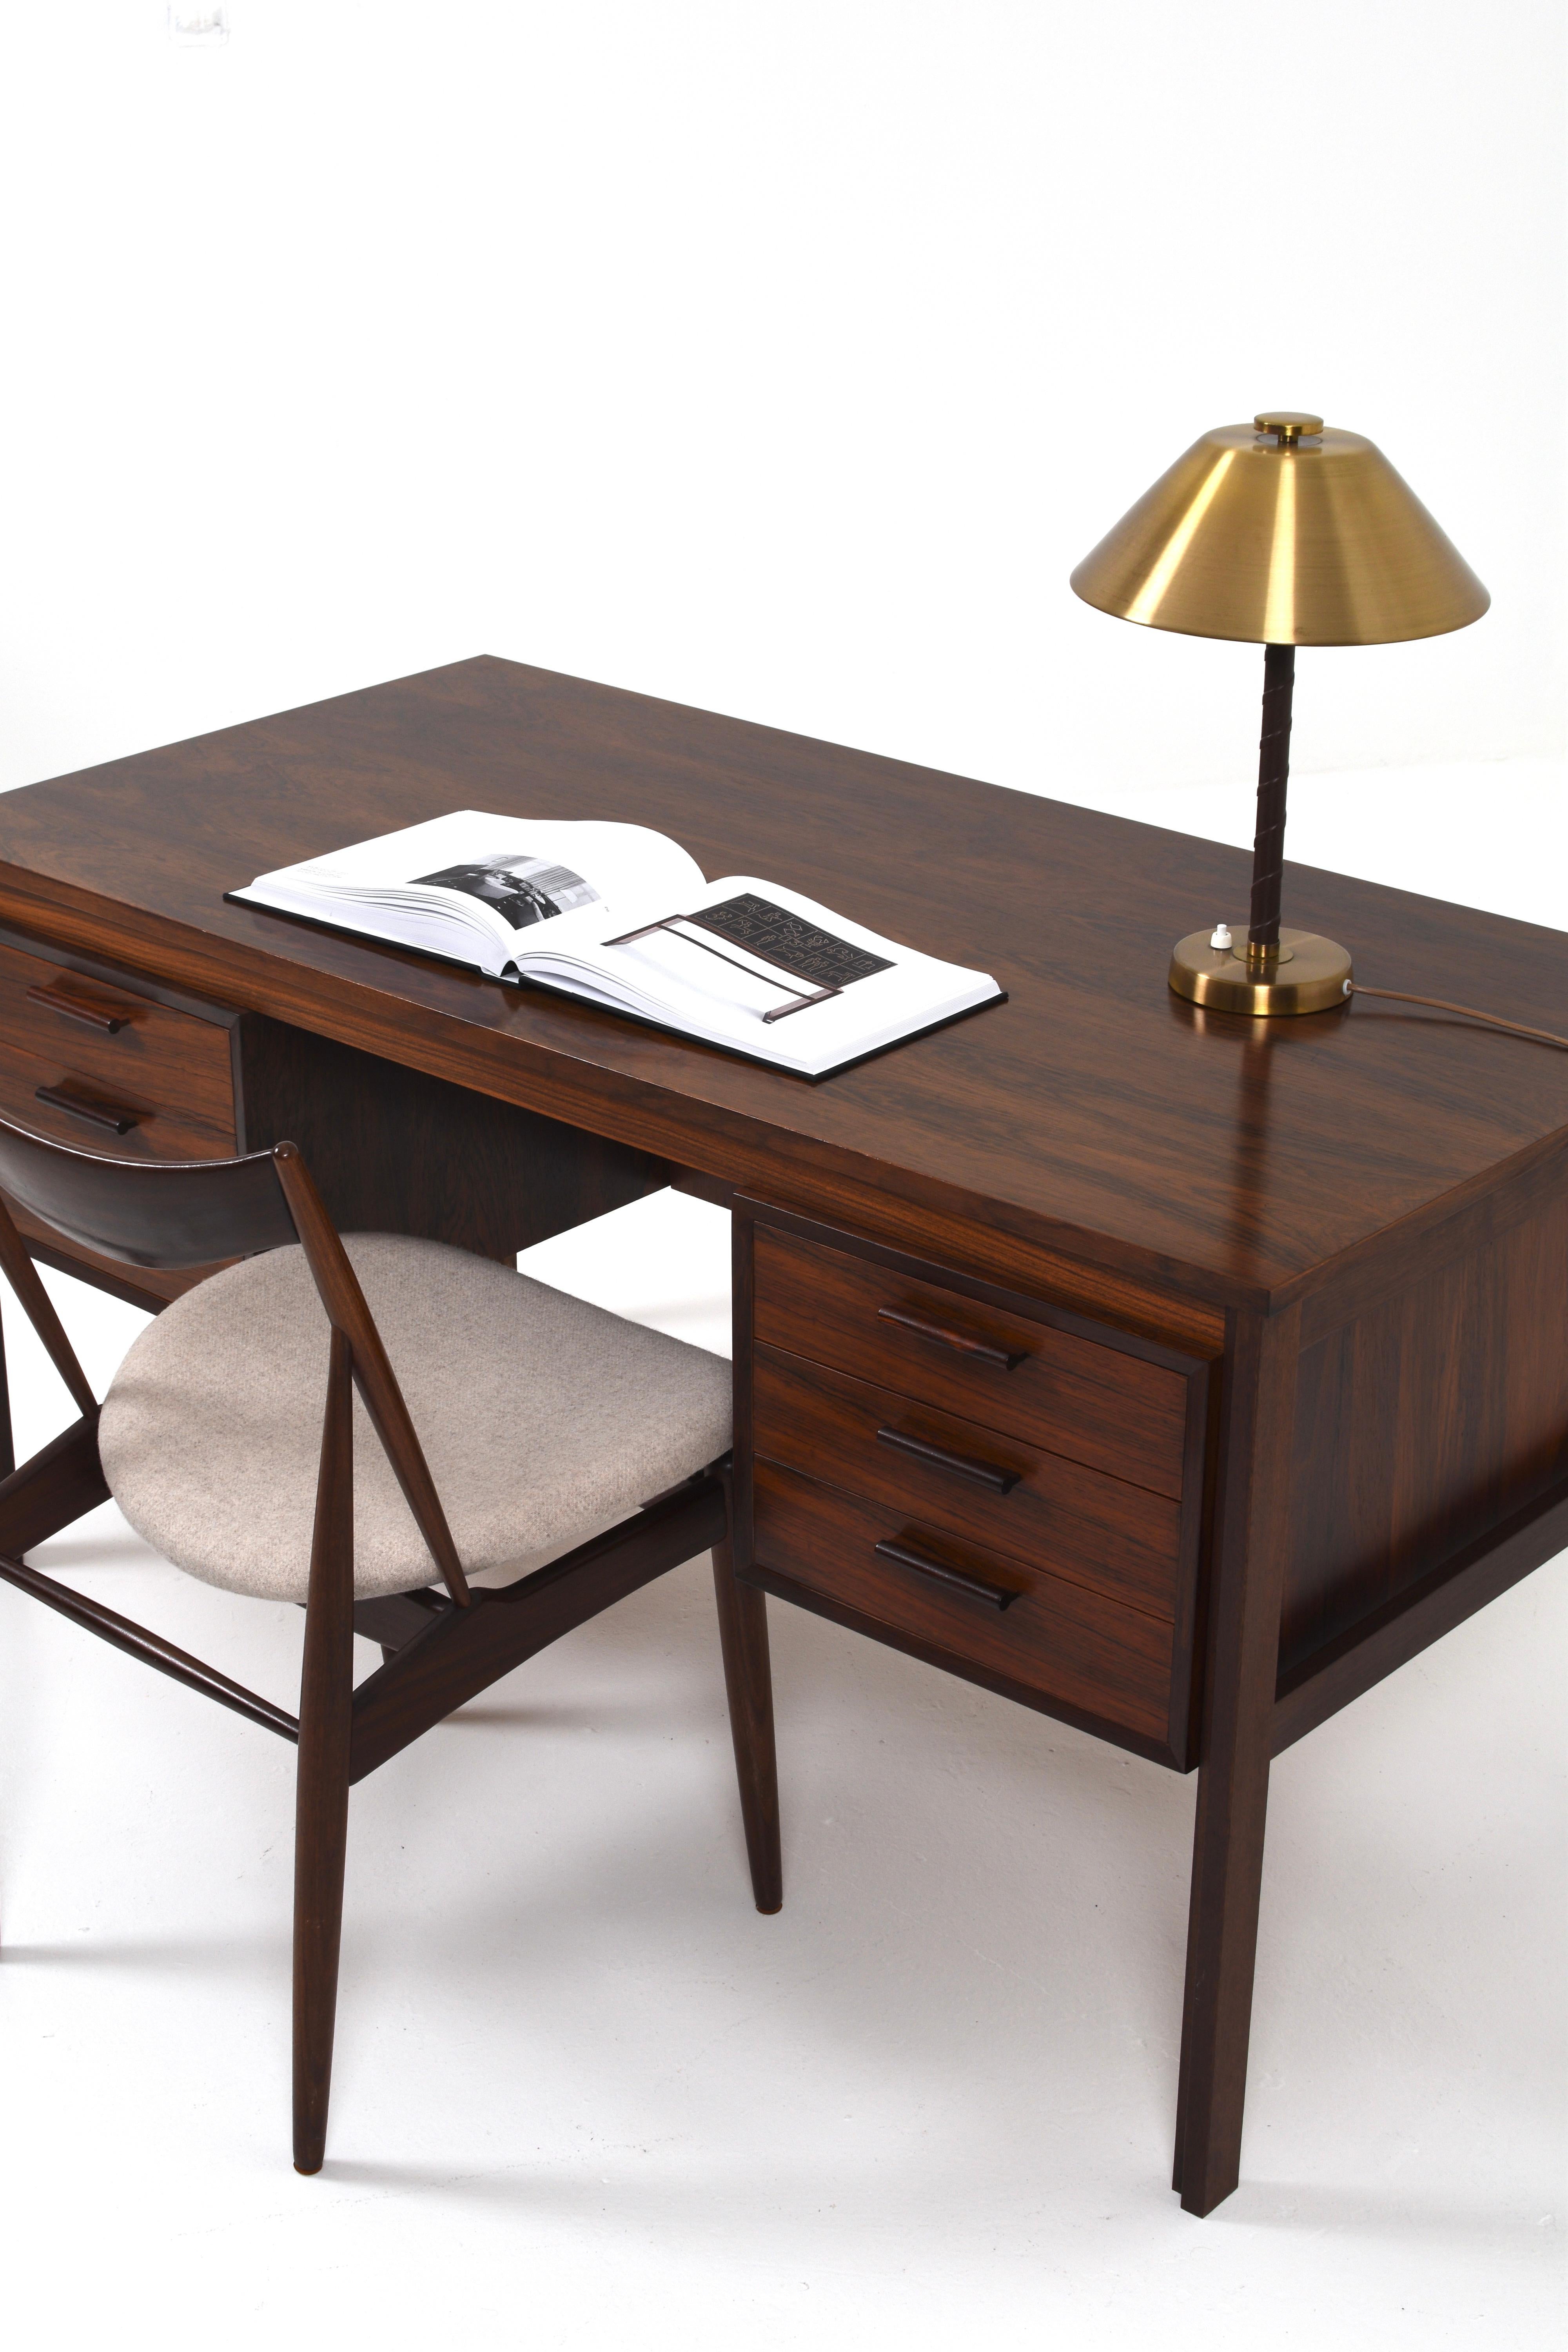 The desk's modern and elegant design makes it an attractive addition to any room. The clean and smooth surface gives a professional look that fits perfectly in both home offices and workplaces.

The desk has six spacious drawers, three on each side,